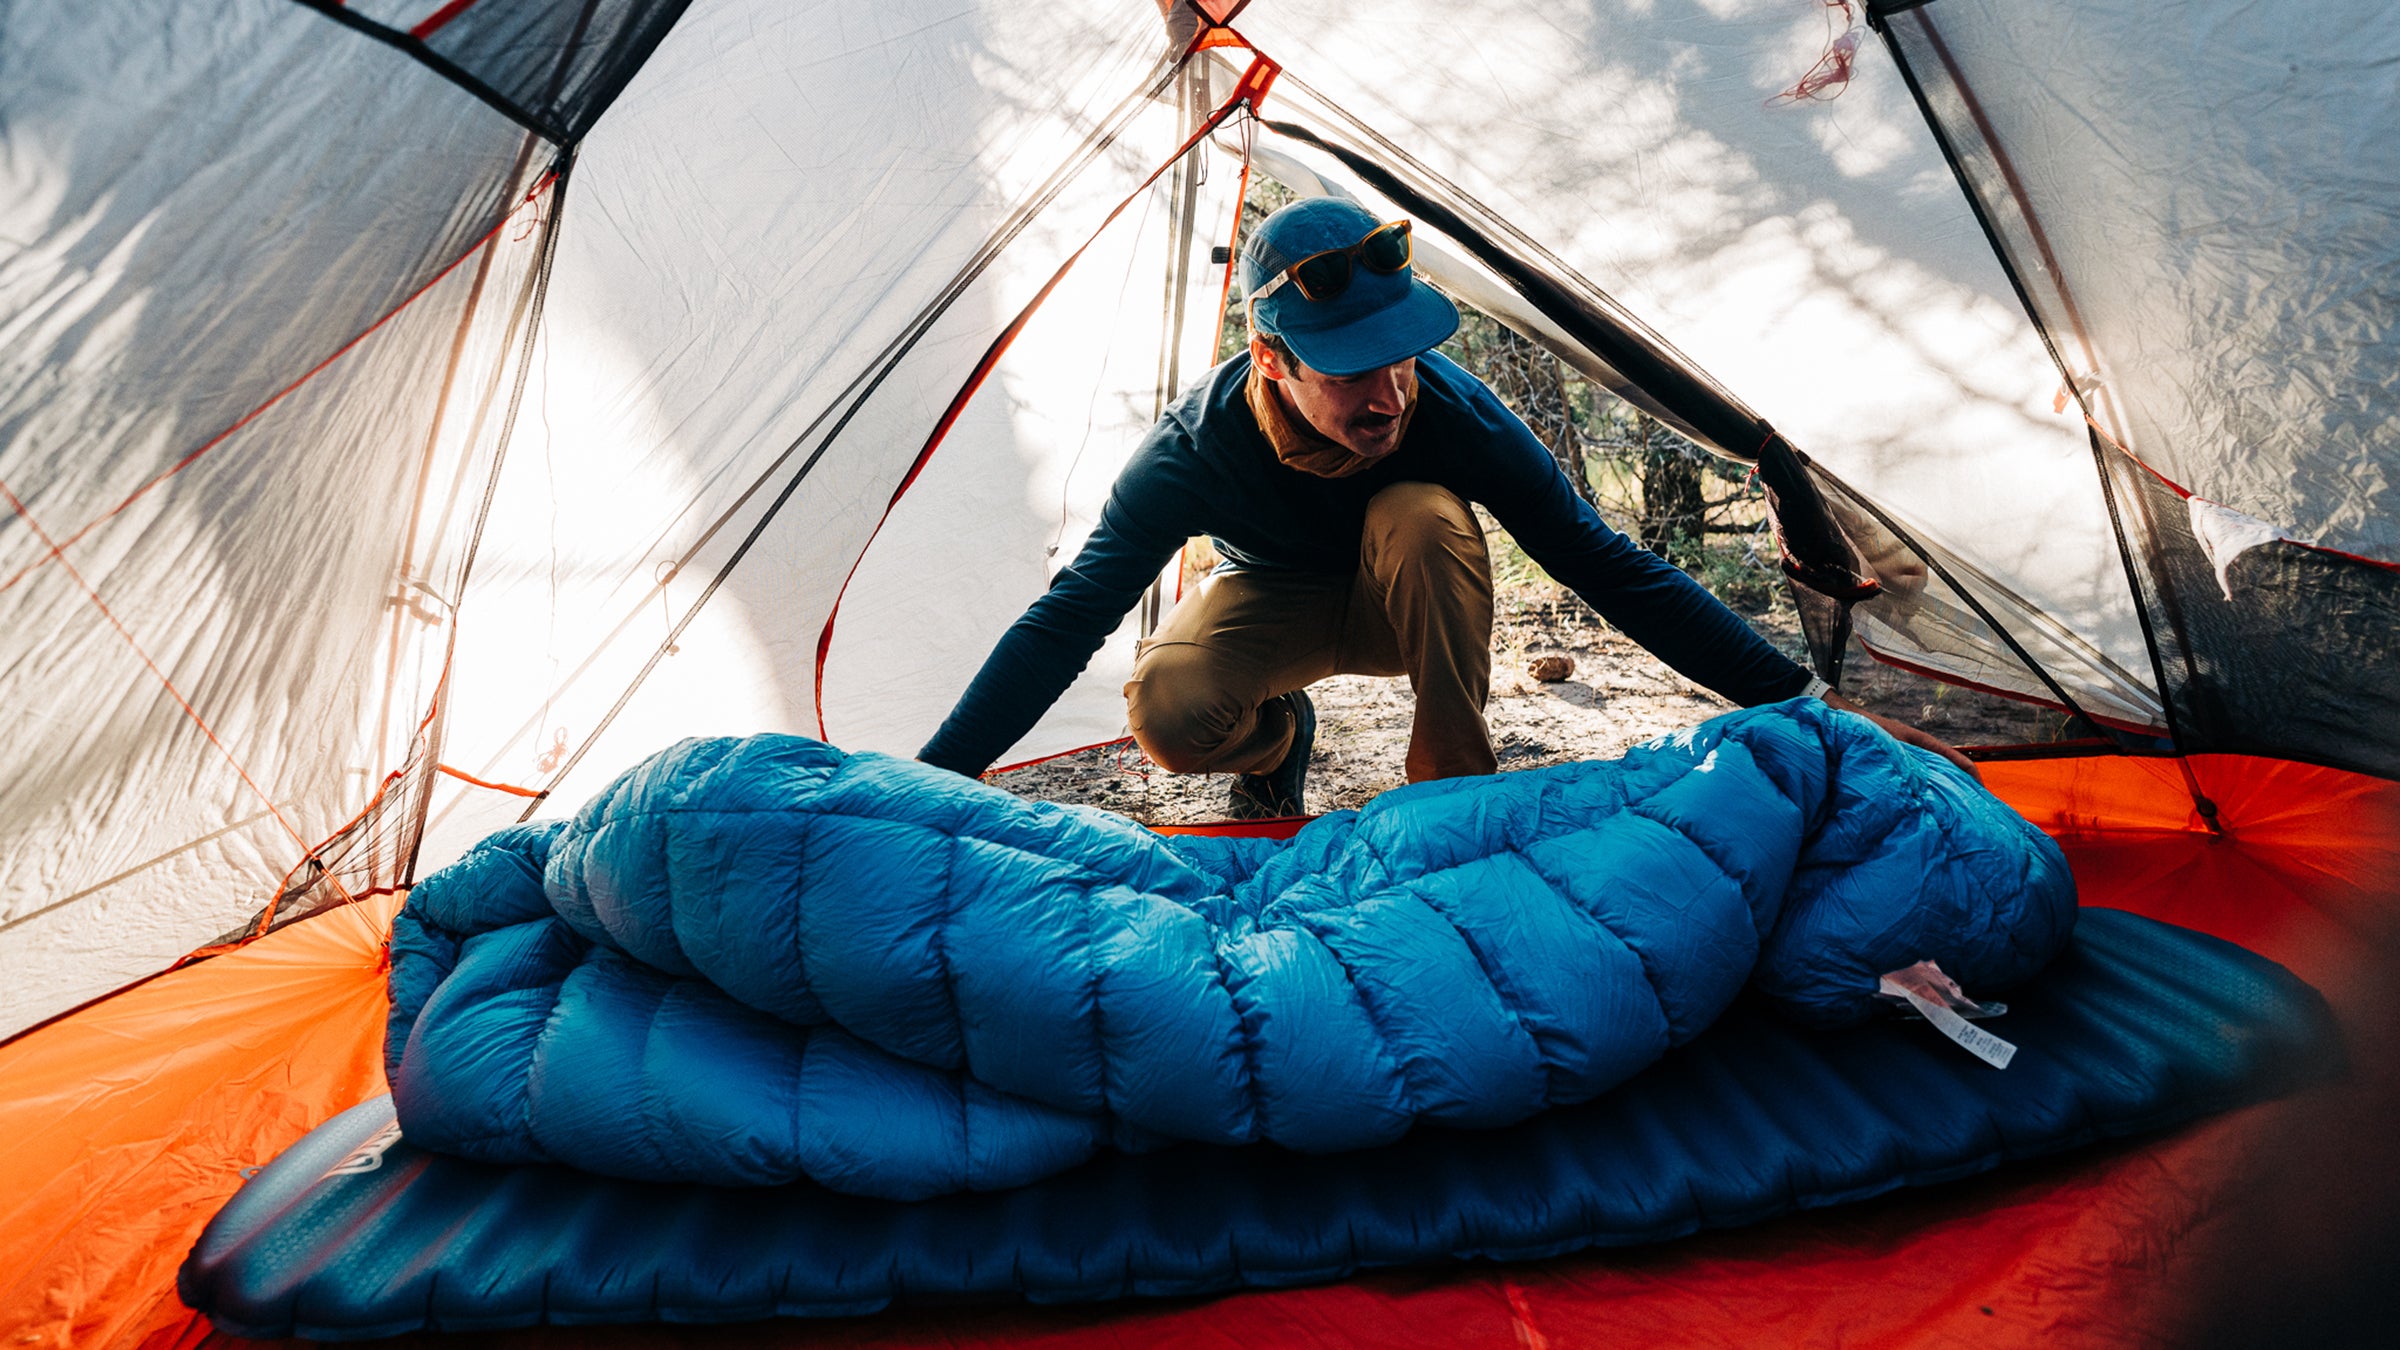 The 13 best sleeping bags of 2023 per a camping expert